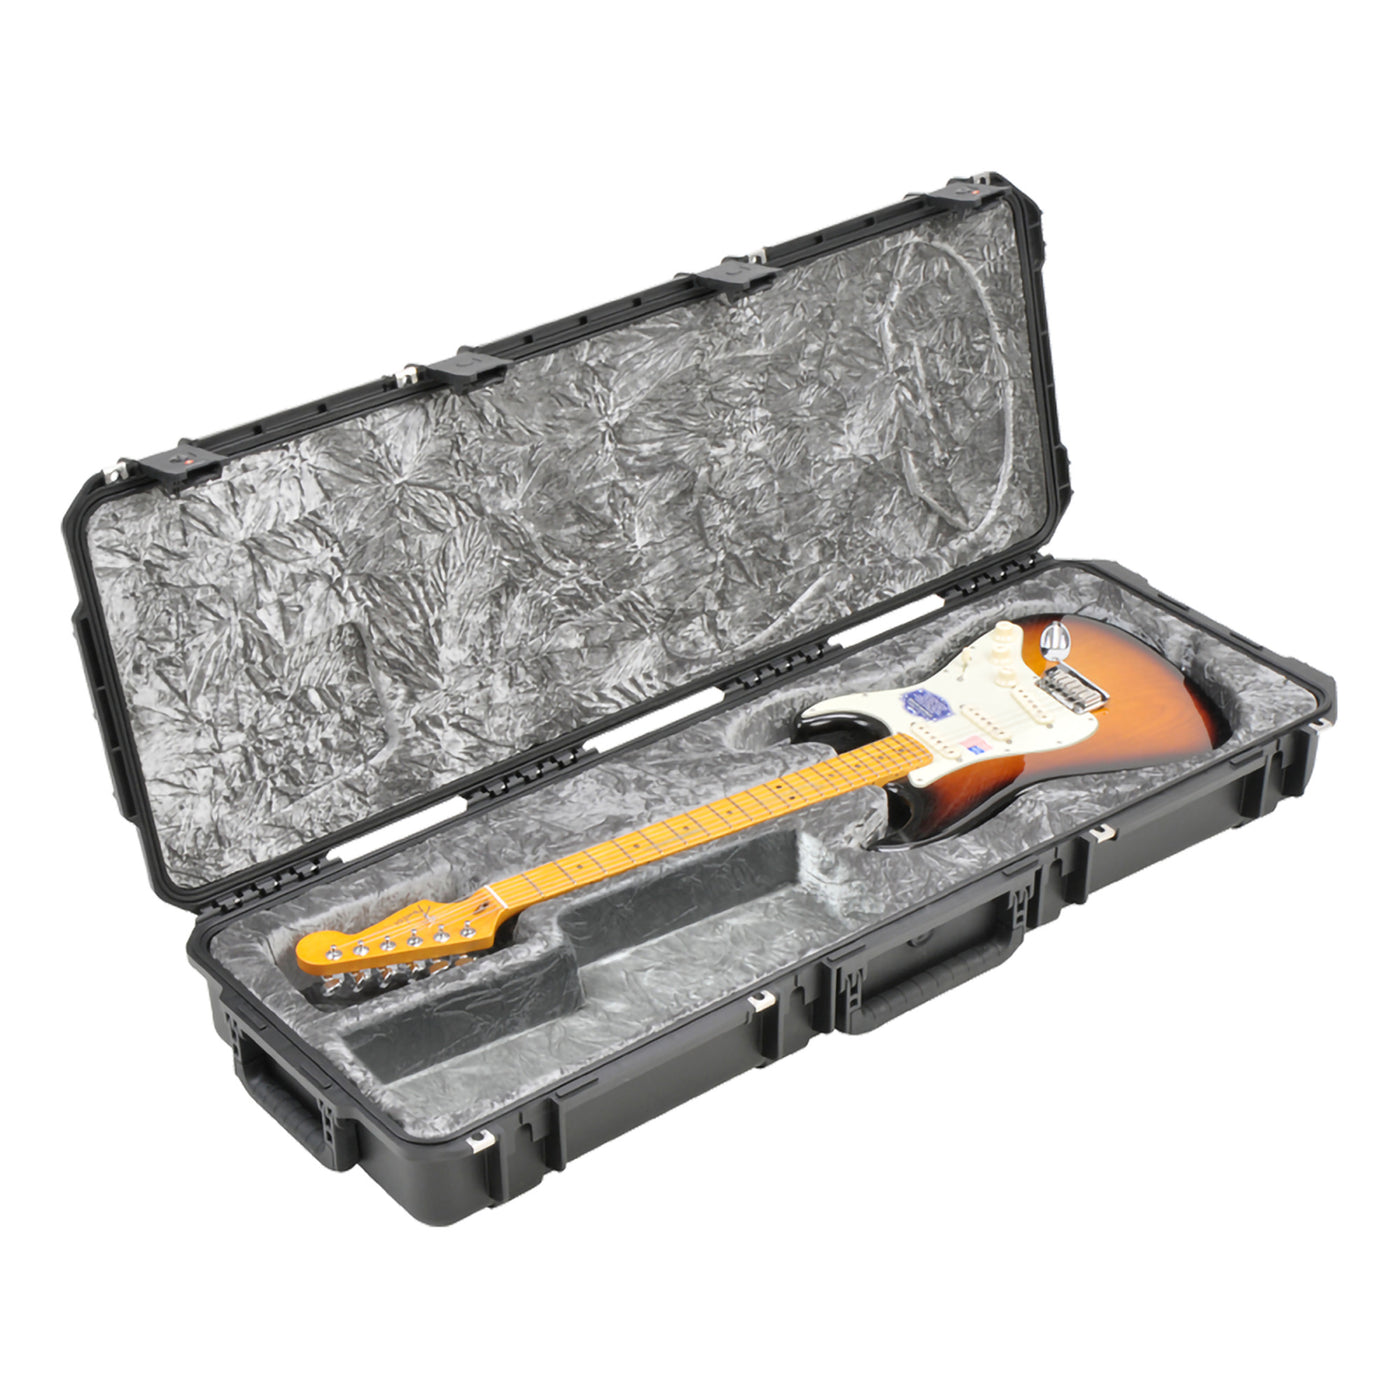 SKB Cases 3i-4214-66 iSeries Waterproof Hardshell Guitar Case for Strat or Tele Body Styles with Pressure Equalization, Wheels, and TSA Locking Latch System